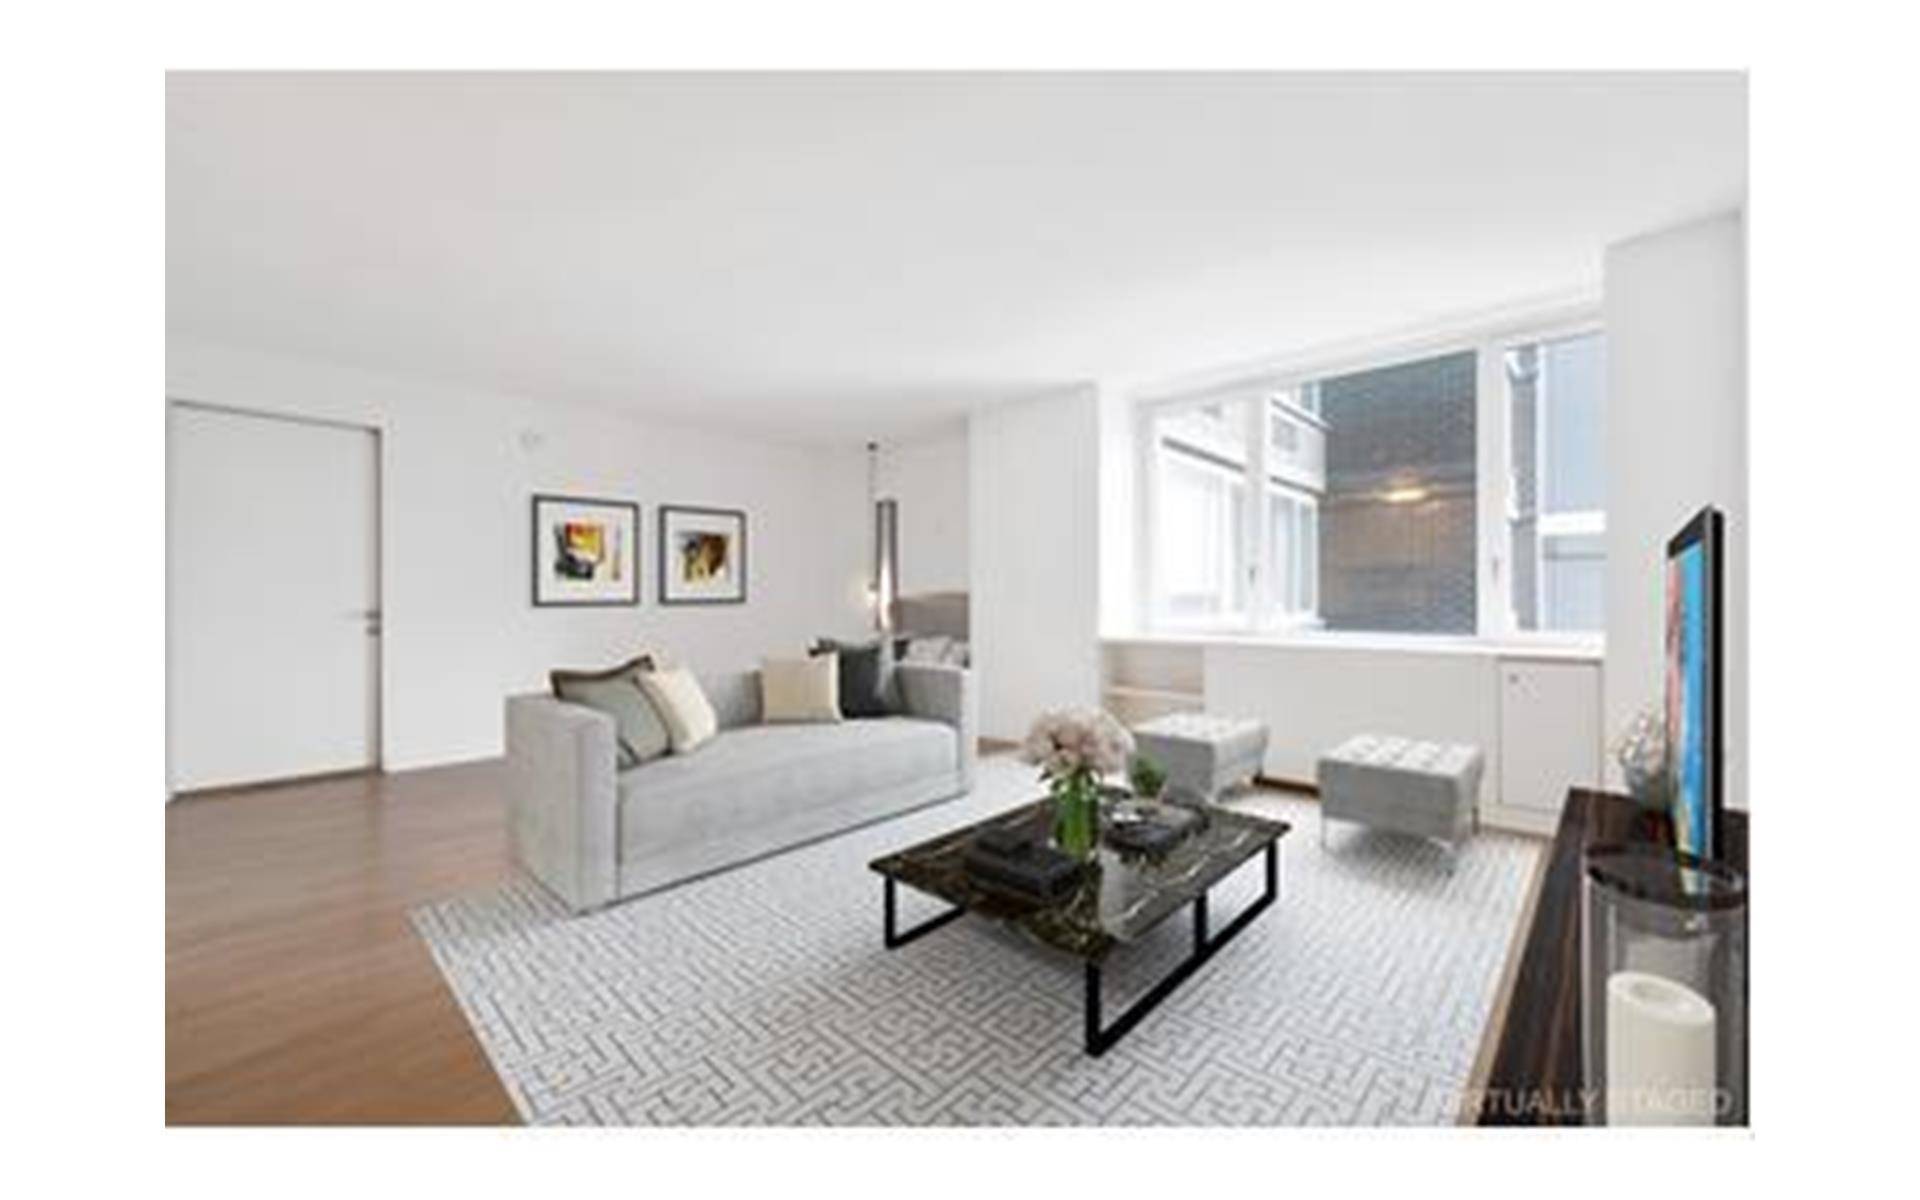 OH by appointment only Sunday 1 30 3pmGORGEOUS Spacious studio alcove with a wall of windows is in pristine condition with beautiful finishes throughout.